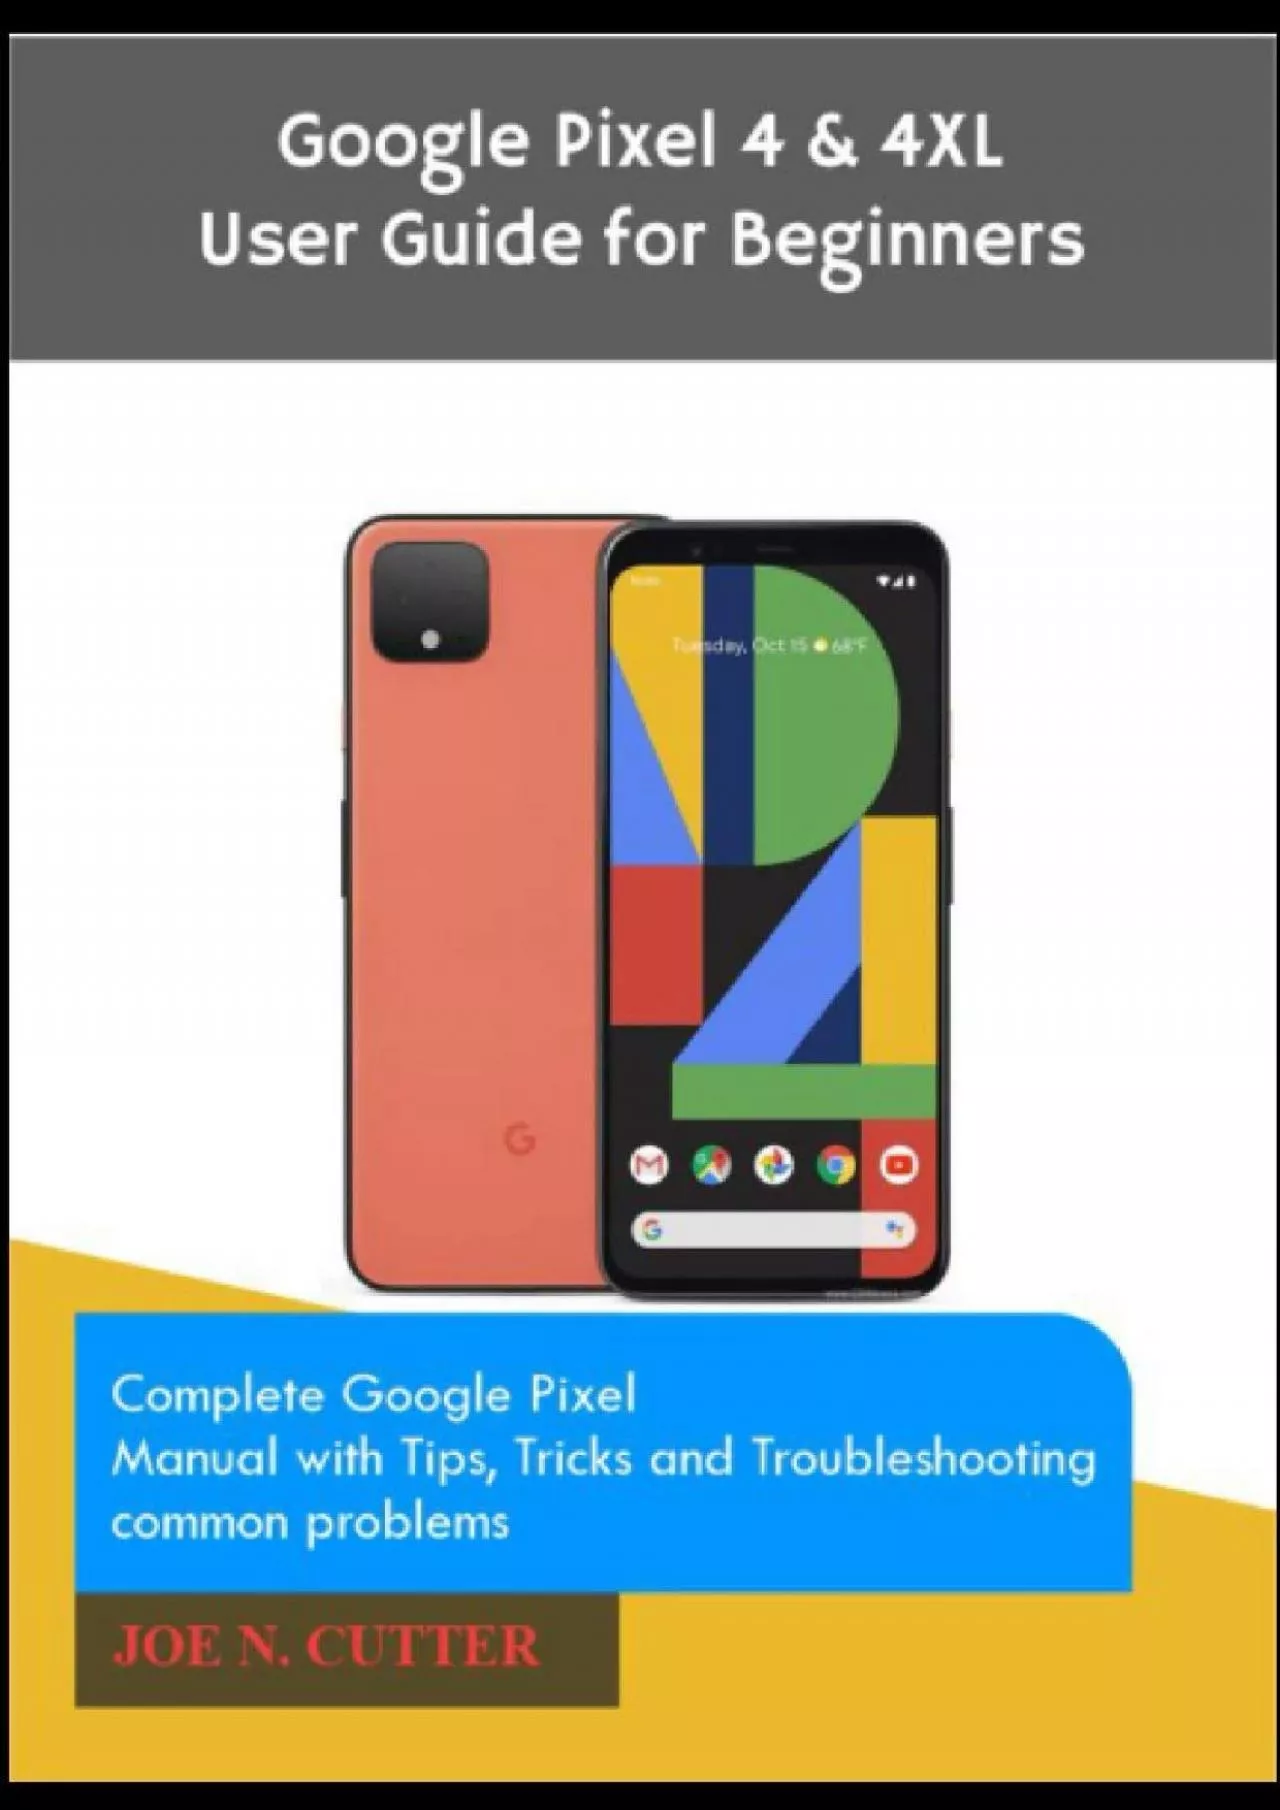 [eBOOK]-Google Pixel 4  4XL User Guide for Beginners: Complete Google Pixel Manual with